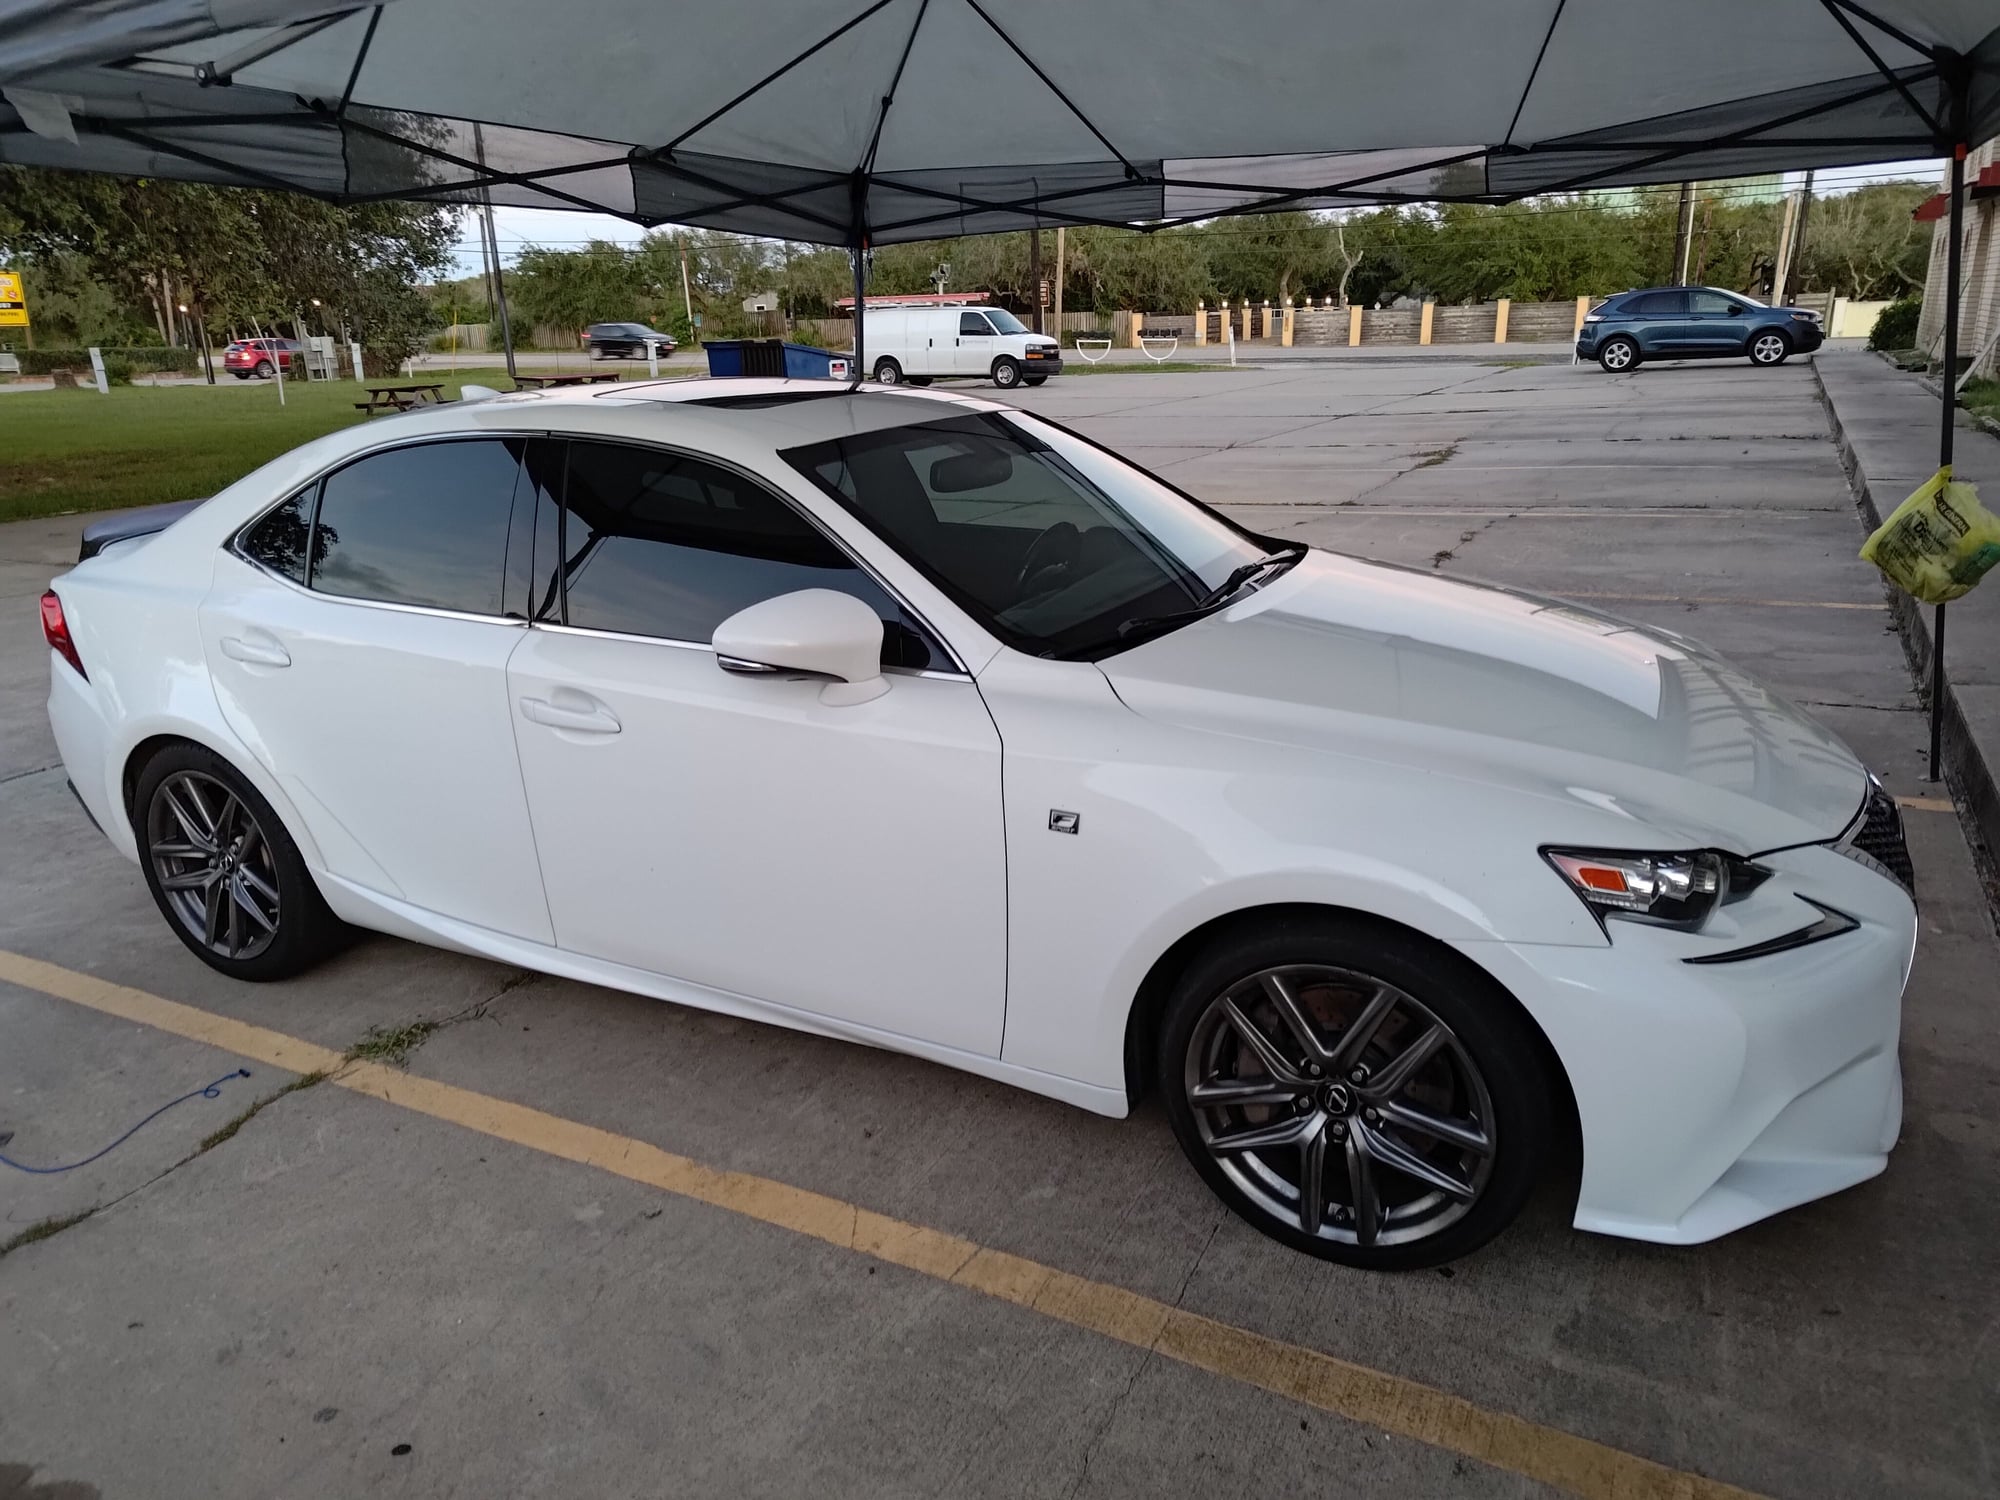 2014 Lexus IS350 - Selling 2014 Lexus IS350 F sport Ultra White w/ Red interior - Used - VIN JTHBE1D24E5012558 - 158,614 Miles - 6 cyl - 2WD - Automatic - Sedan - White - Rockport, TX 78382, United States